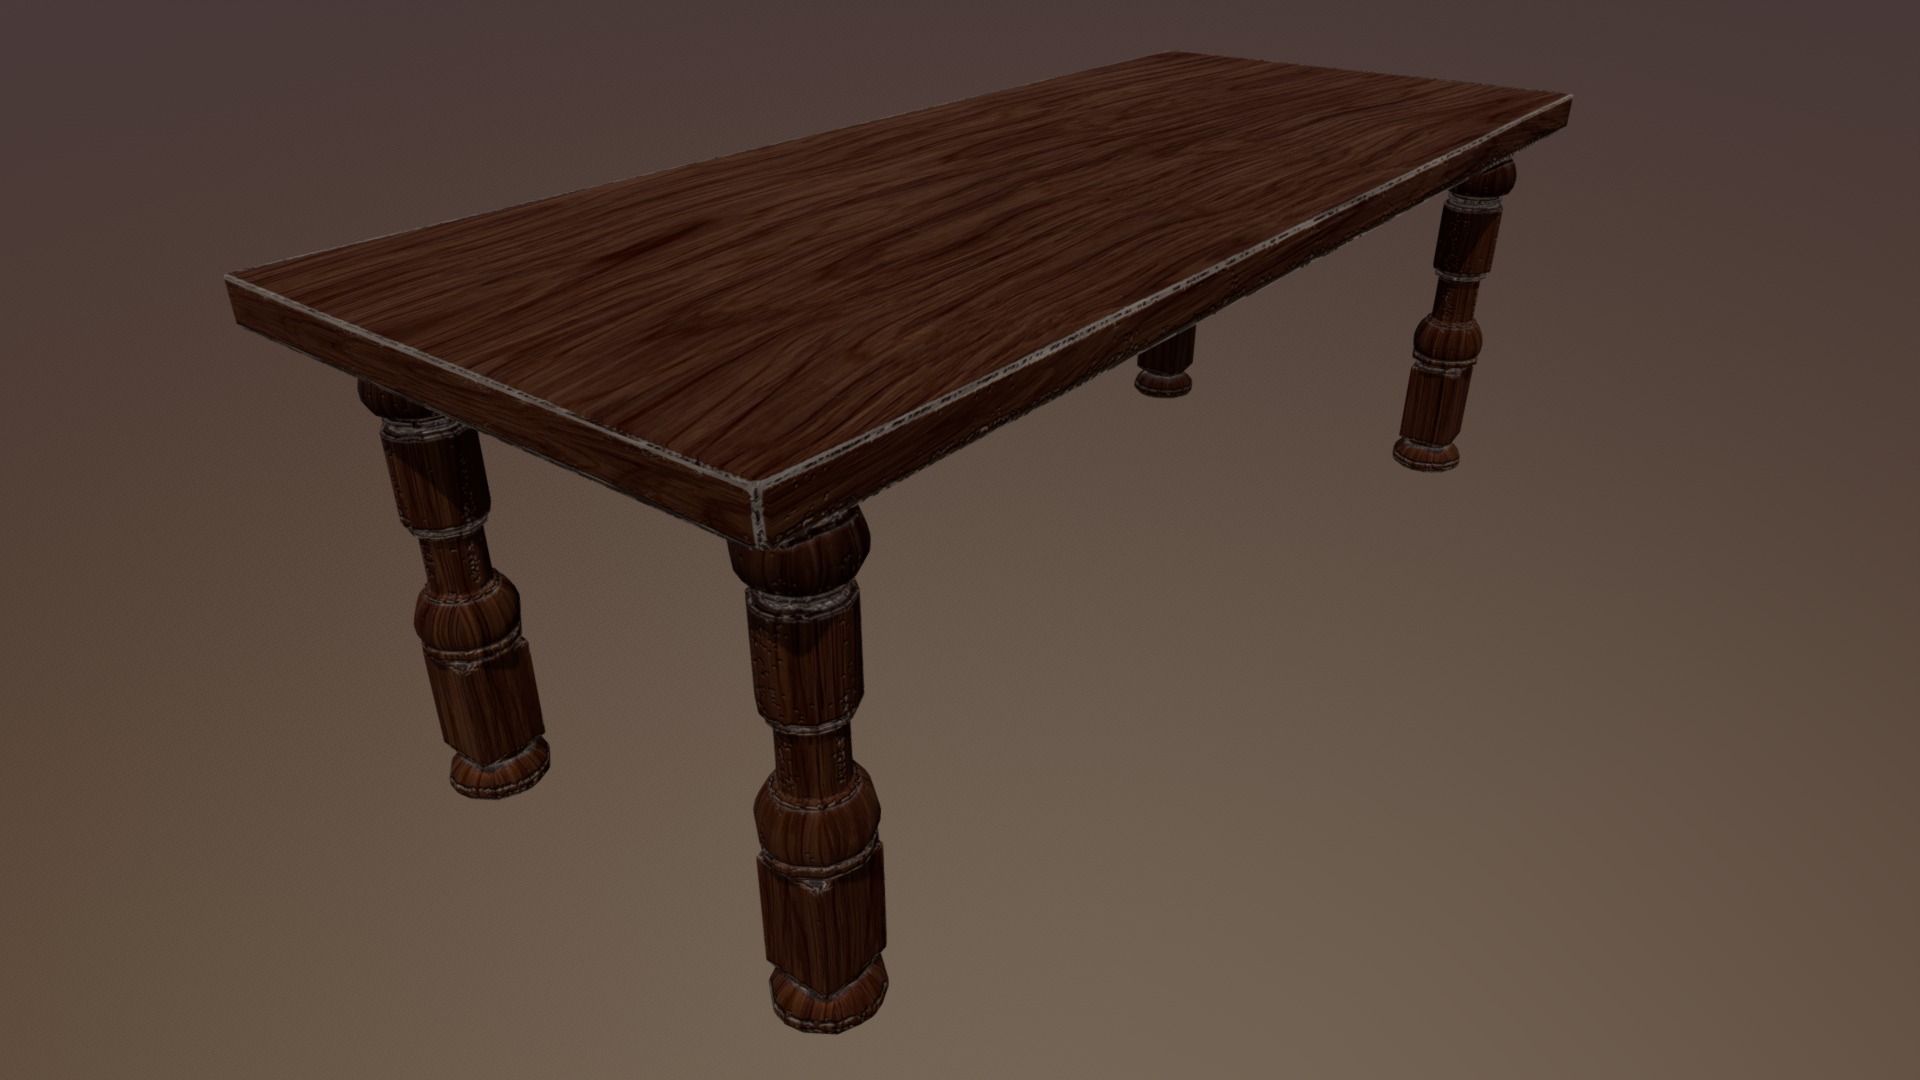 3D model Small Table Low - This is a 3D model of the Small Table Low. The 3D model is about a wooden table with a metal handle.